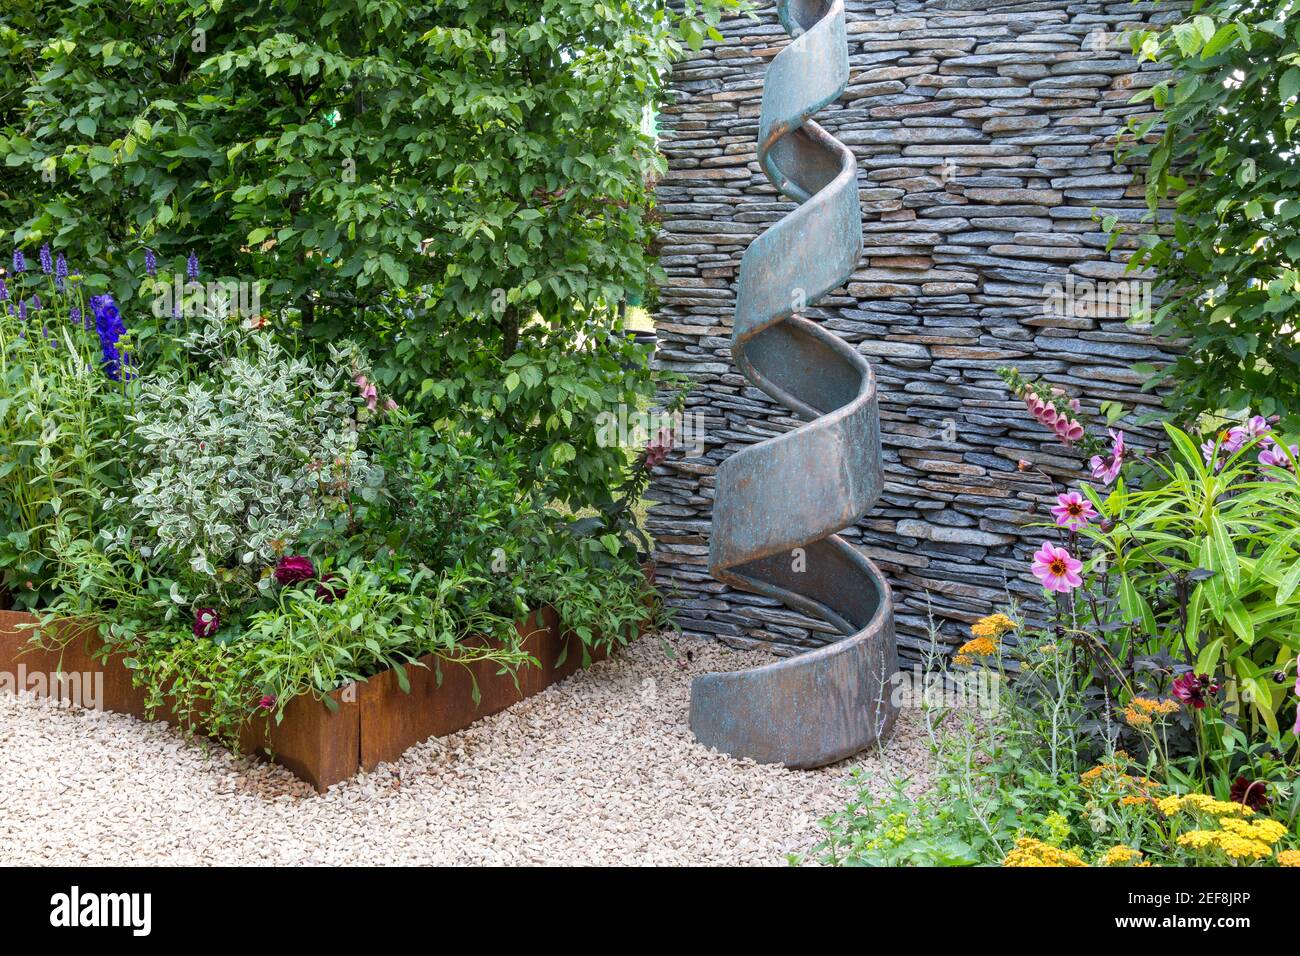 Small English courtyard cottage garden with spiral sculpture - dry stone wall - hedge - gravel path with garden flower borders England UK Stock Photo